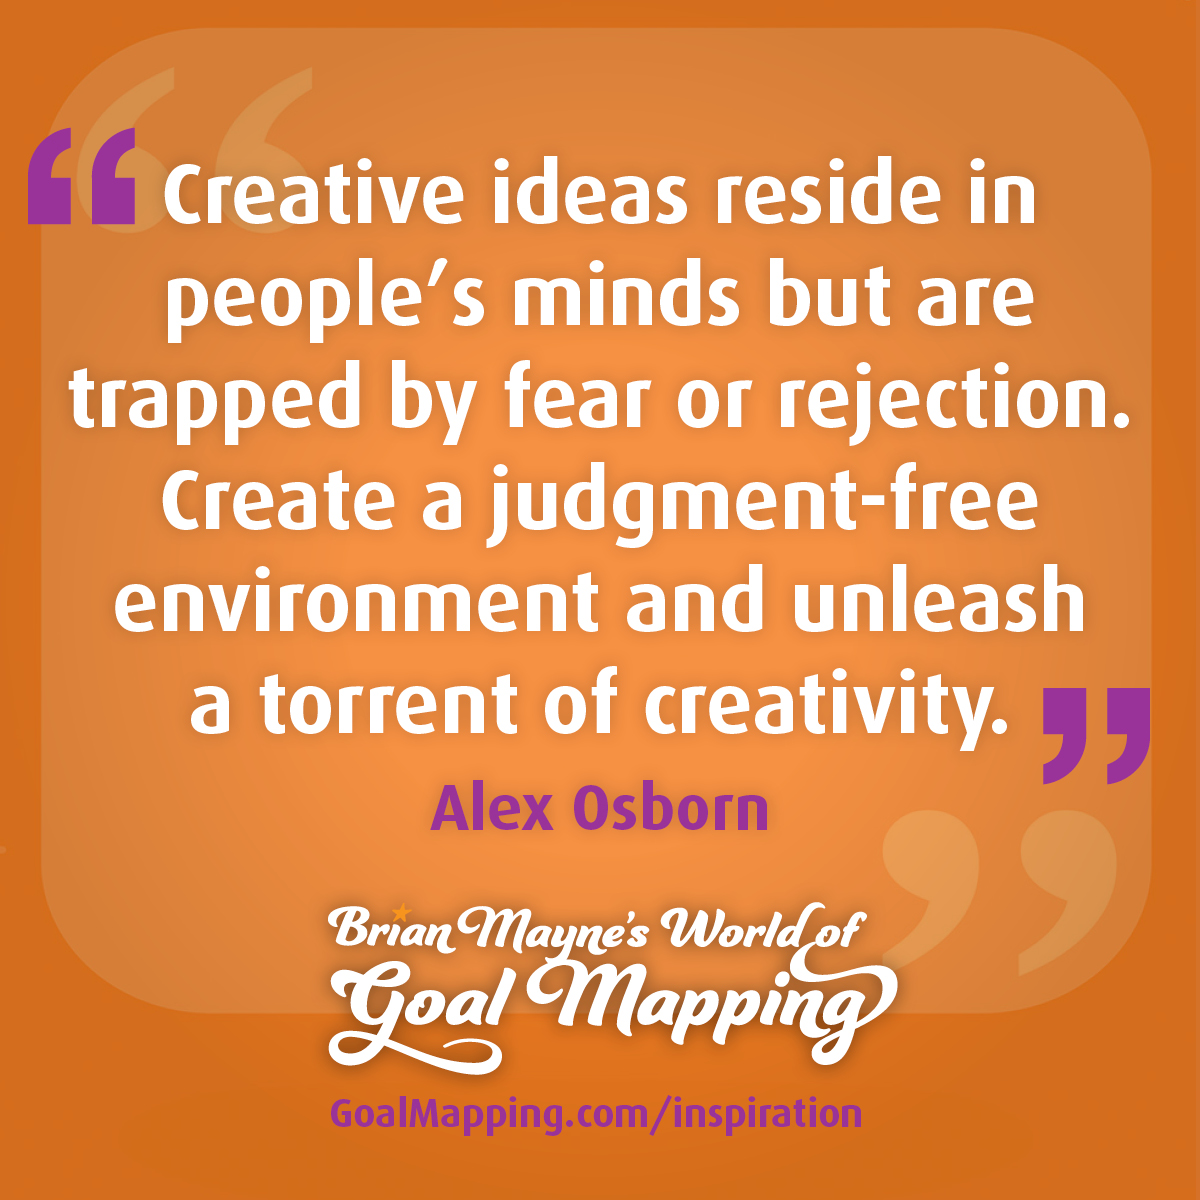 "Creative ideas reside in people’s minds but are trapped by fear or rejection. Create a judgment-free environment and you’ll unleash a torrent of creativity." Alex Osborn